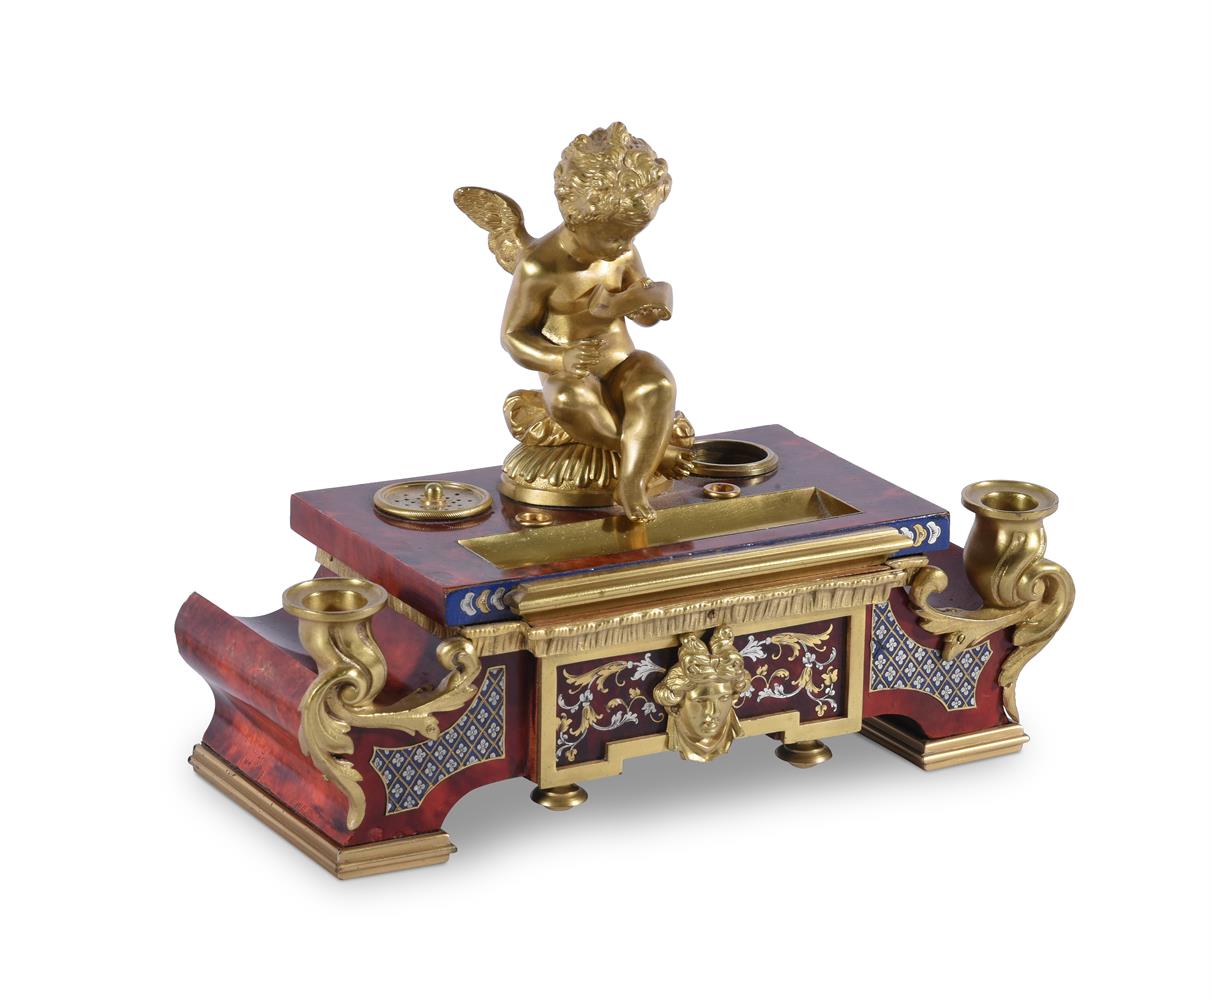 Y A FRENCH FAUX TORTOISHELL AND GILT METAL MOUNTED INK STAND IN BOULLE STYLE LATE 19TH CENTURY